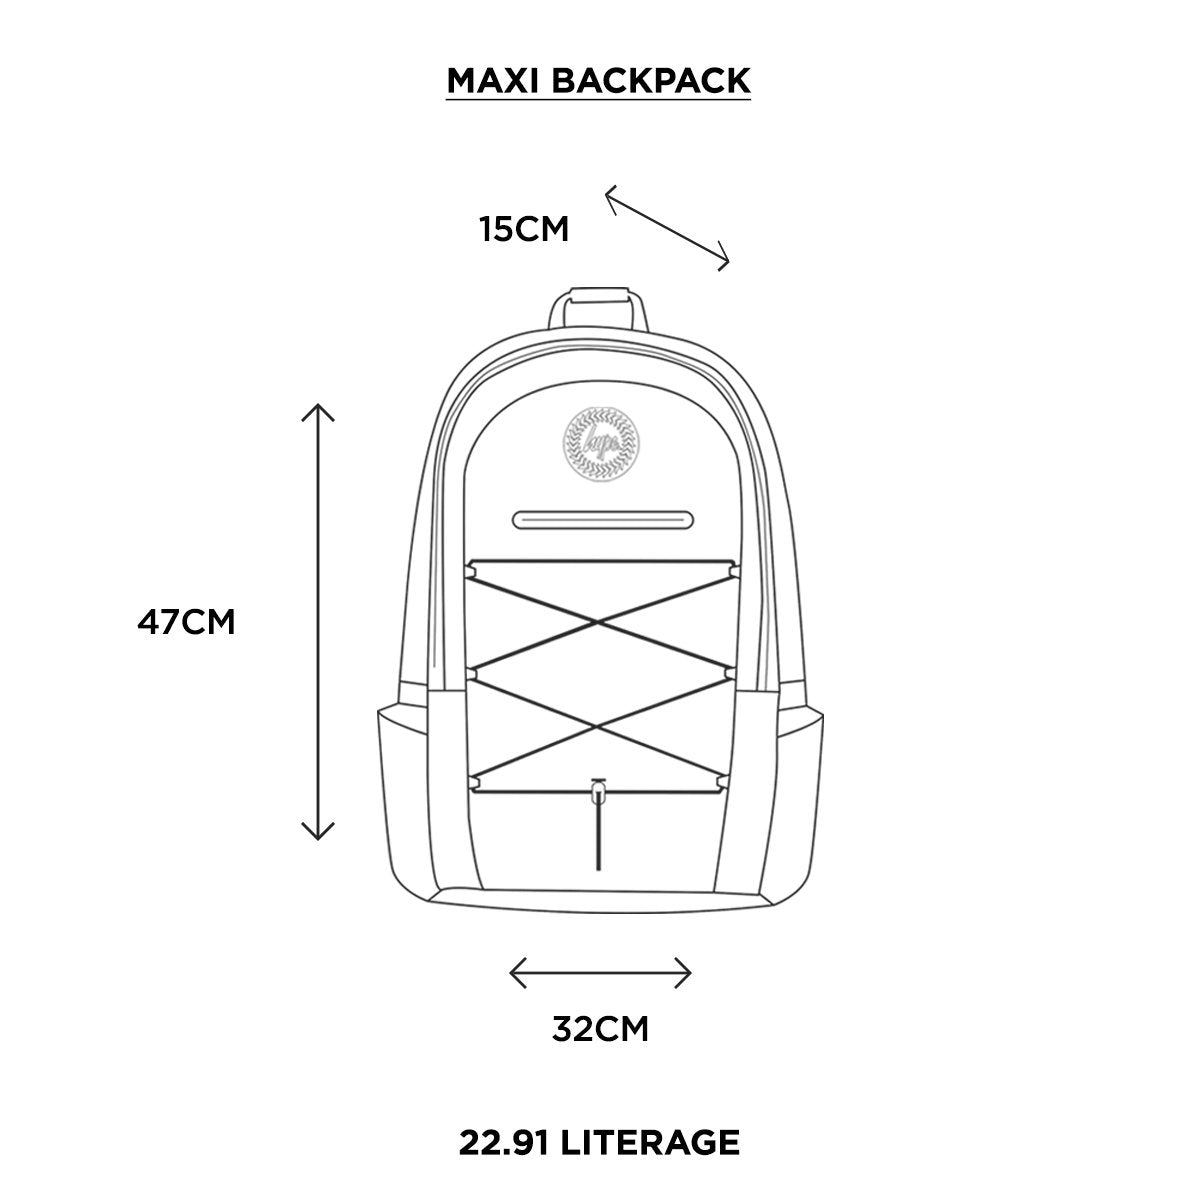 HYPE NAVY MAXI BACKPACK